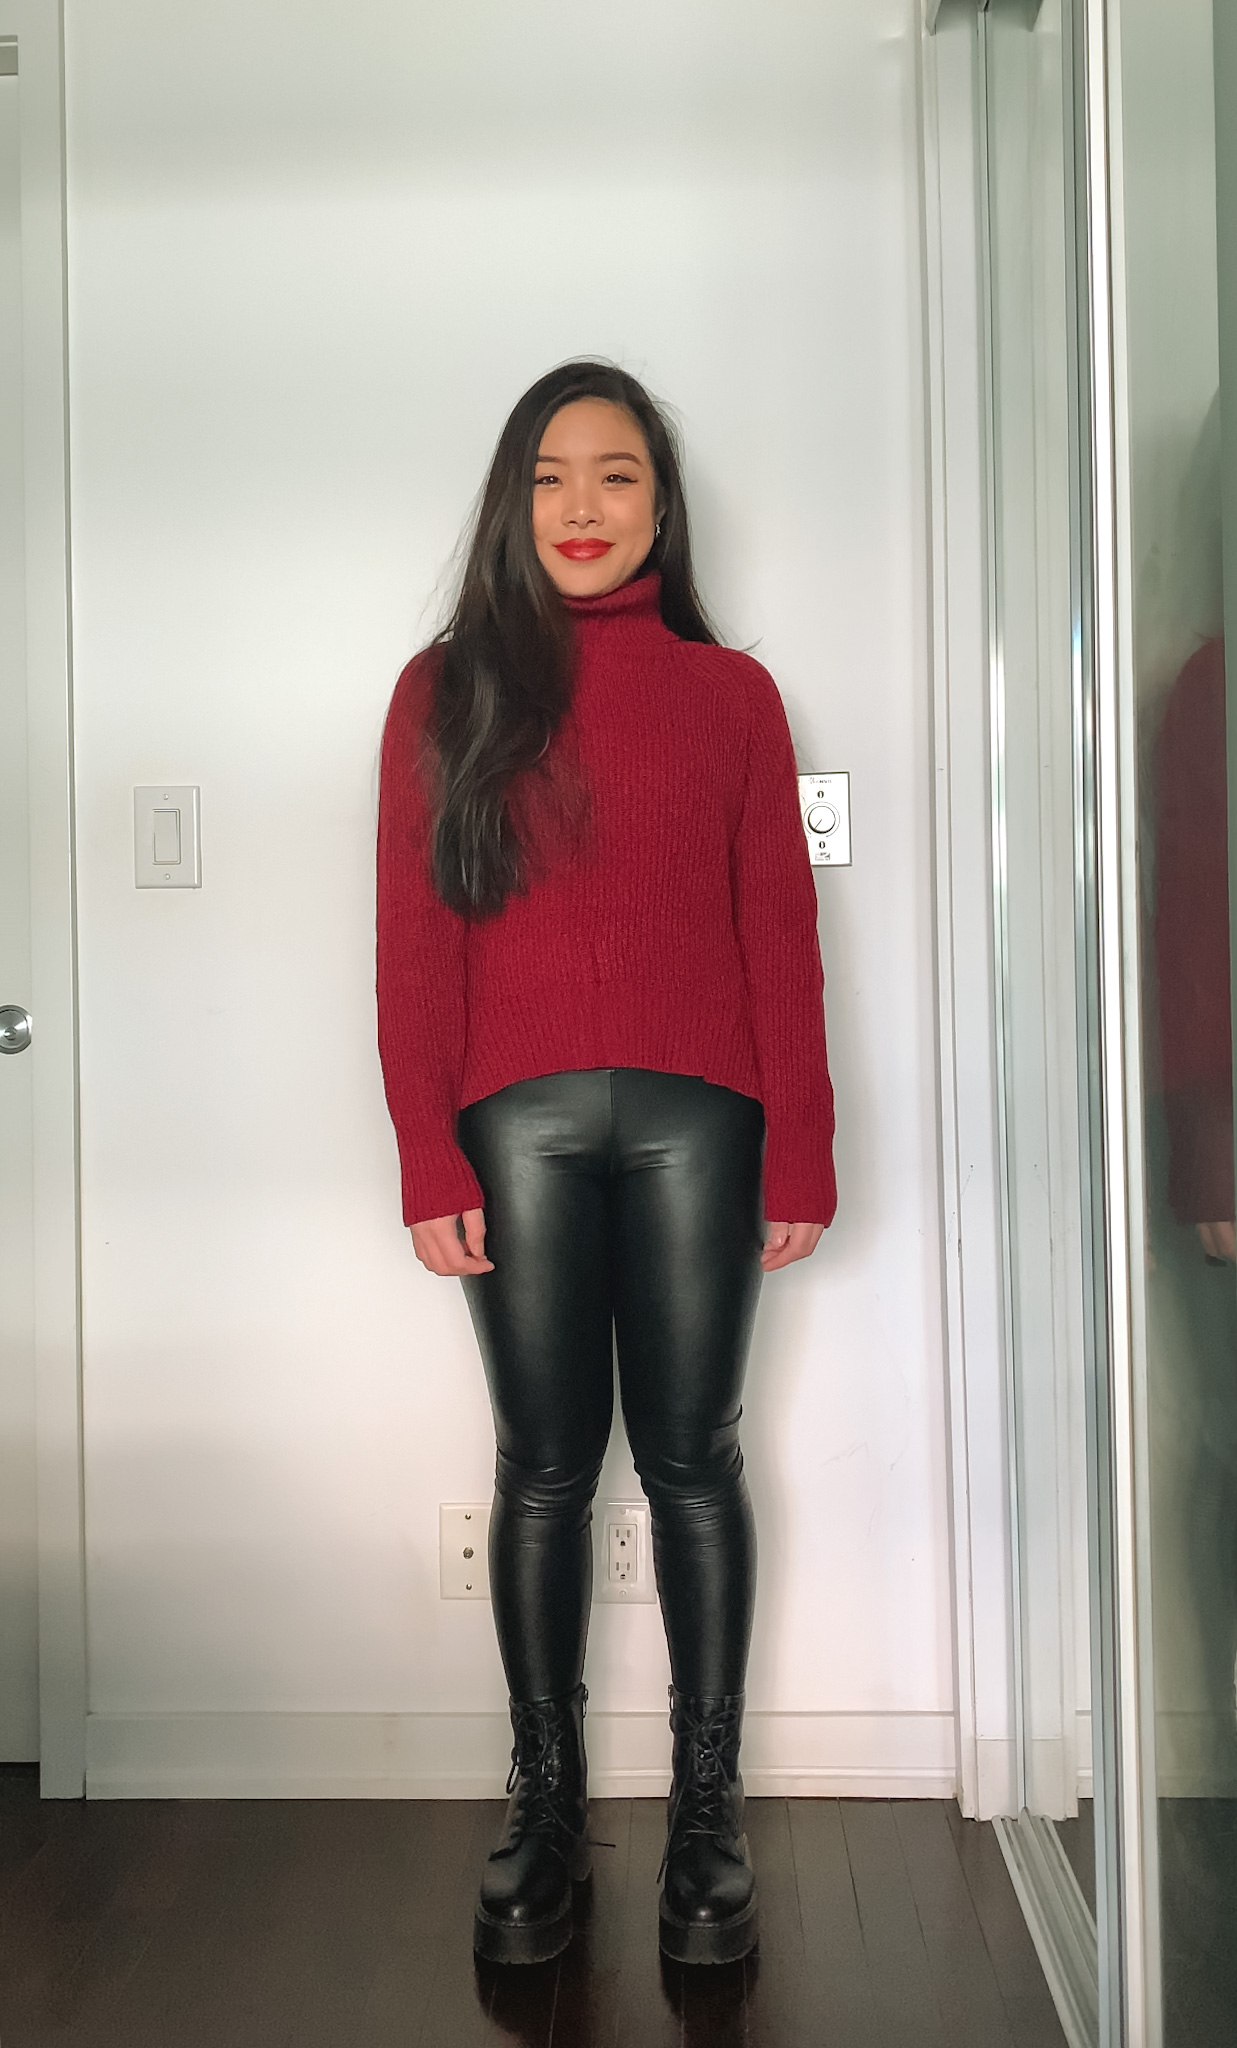 Lunar New Year & Chinese New Year outfit ideas | Aritzia oversized burgundy turtleneck + leather leggings + Steve Madden combat boots